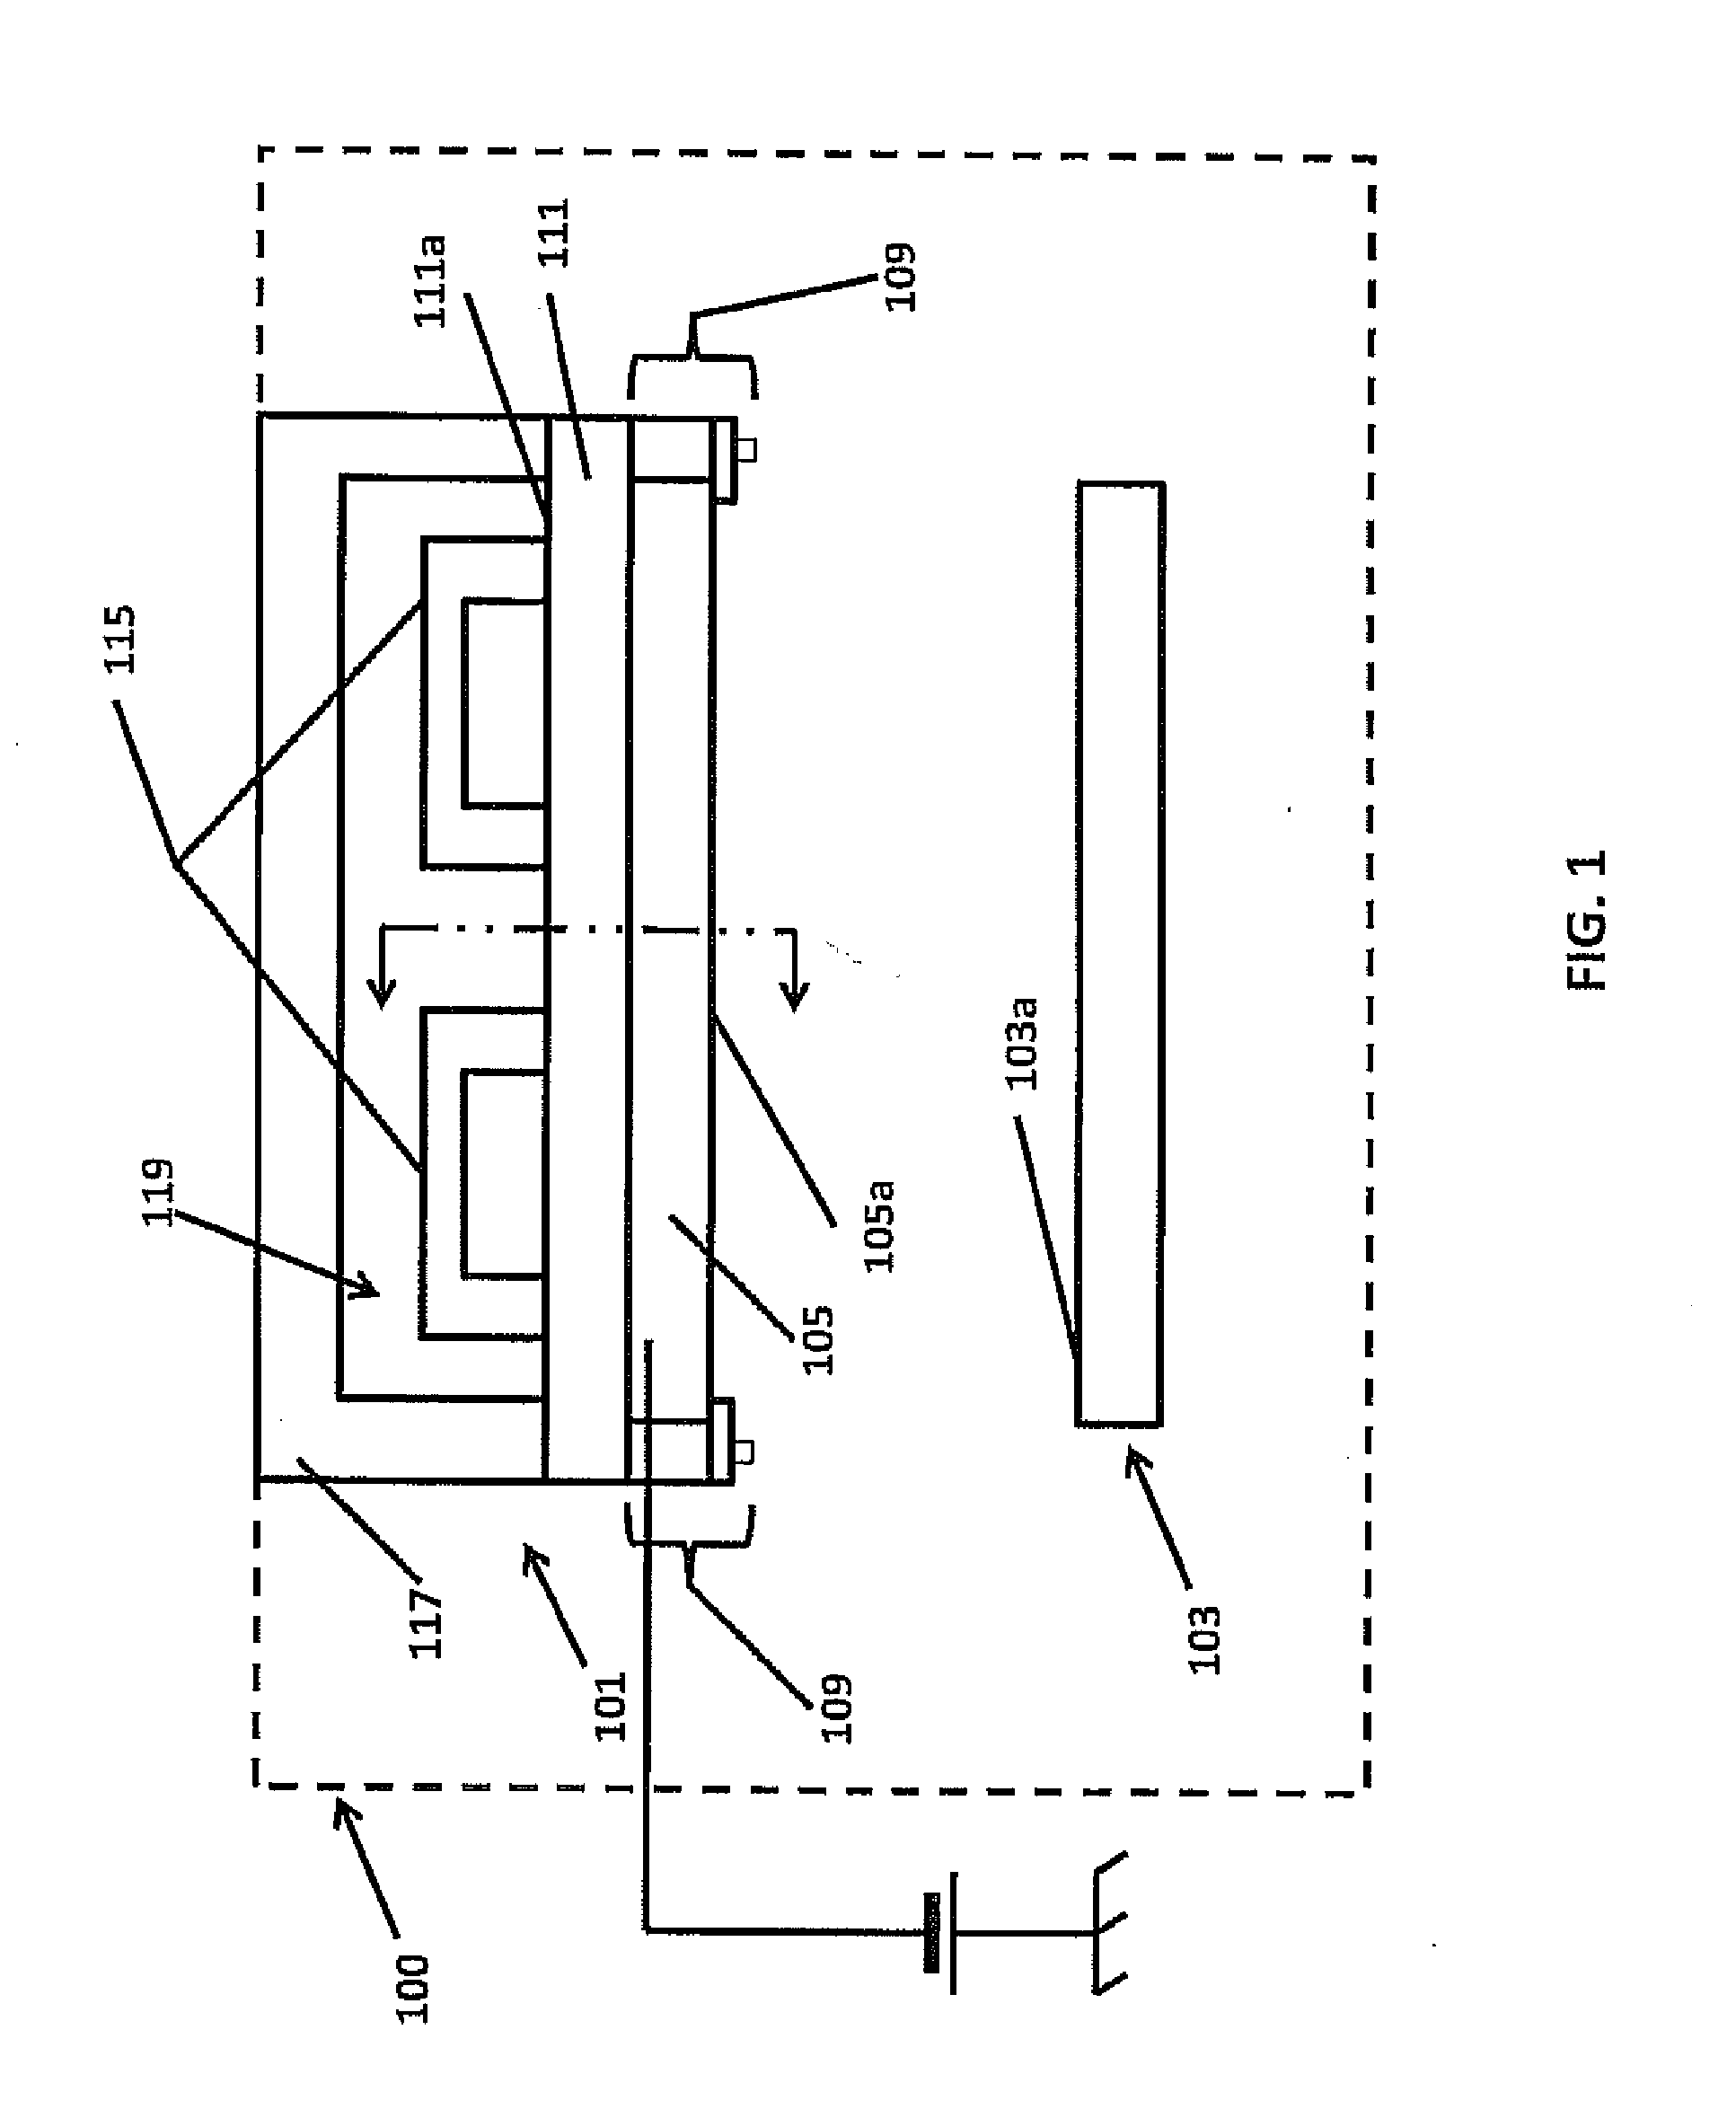 Sputtering target temperature control utilizing layers having predetermined emissivity coefficients